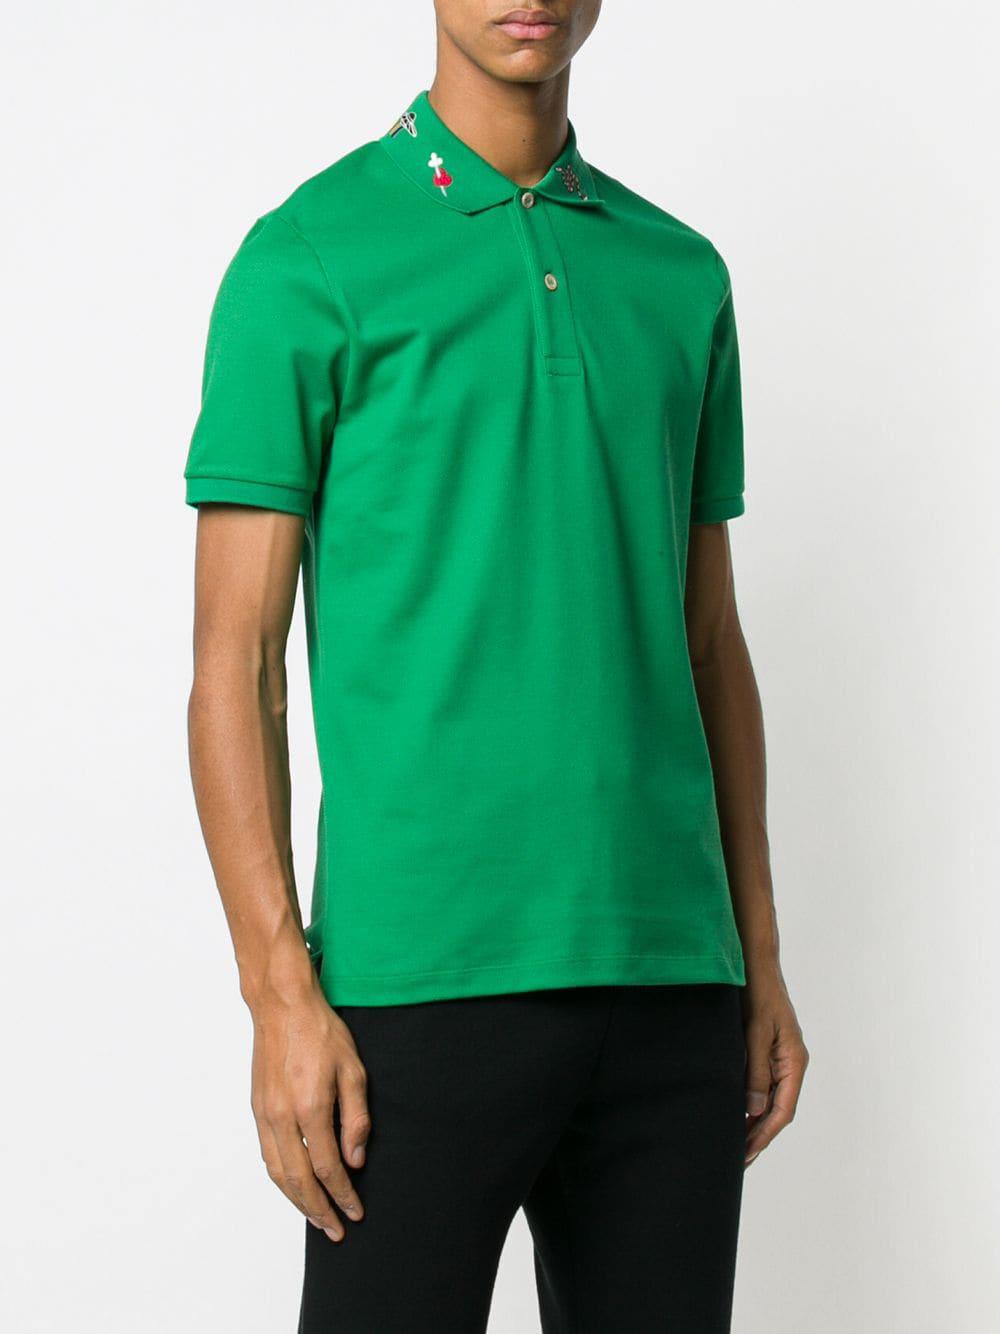 Gucci Cotton Embroidered Polo Shirt in Green for Men - Lyst